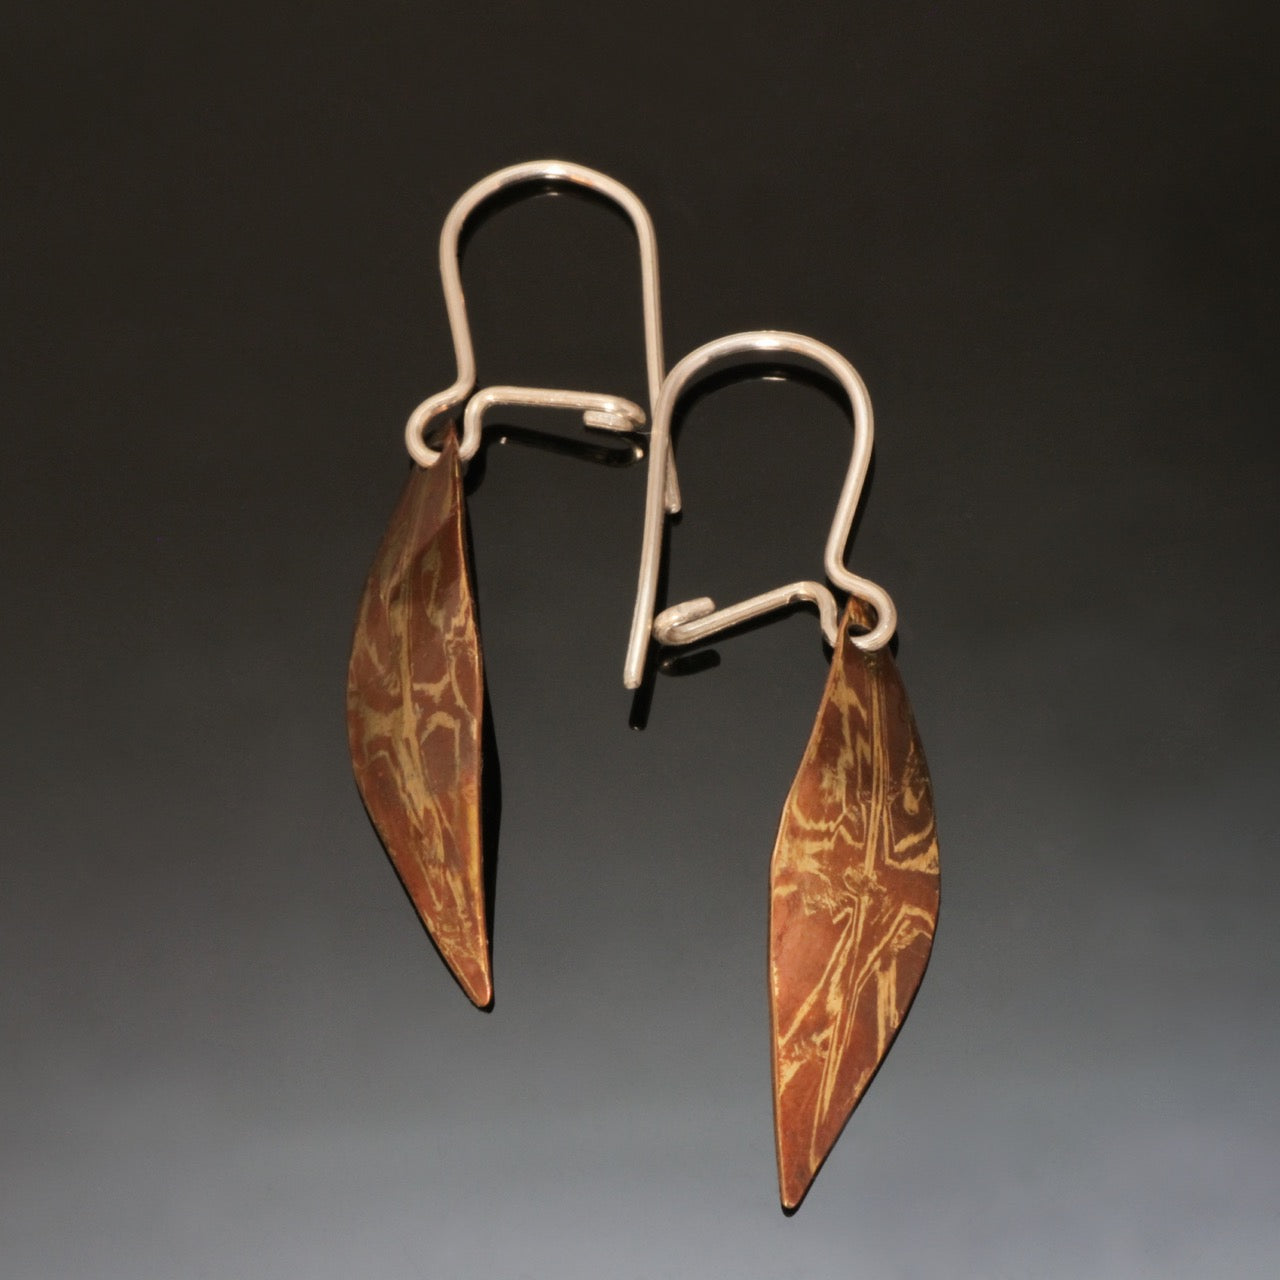 leaf shaped earrings made with copper and brass in a random pattern